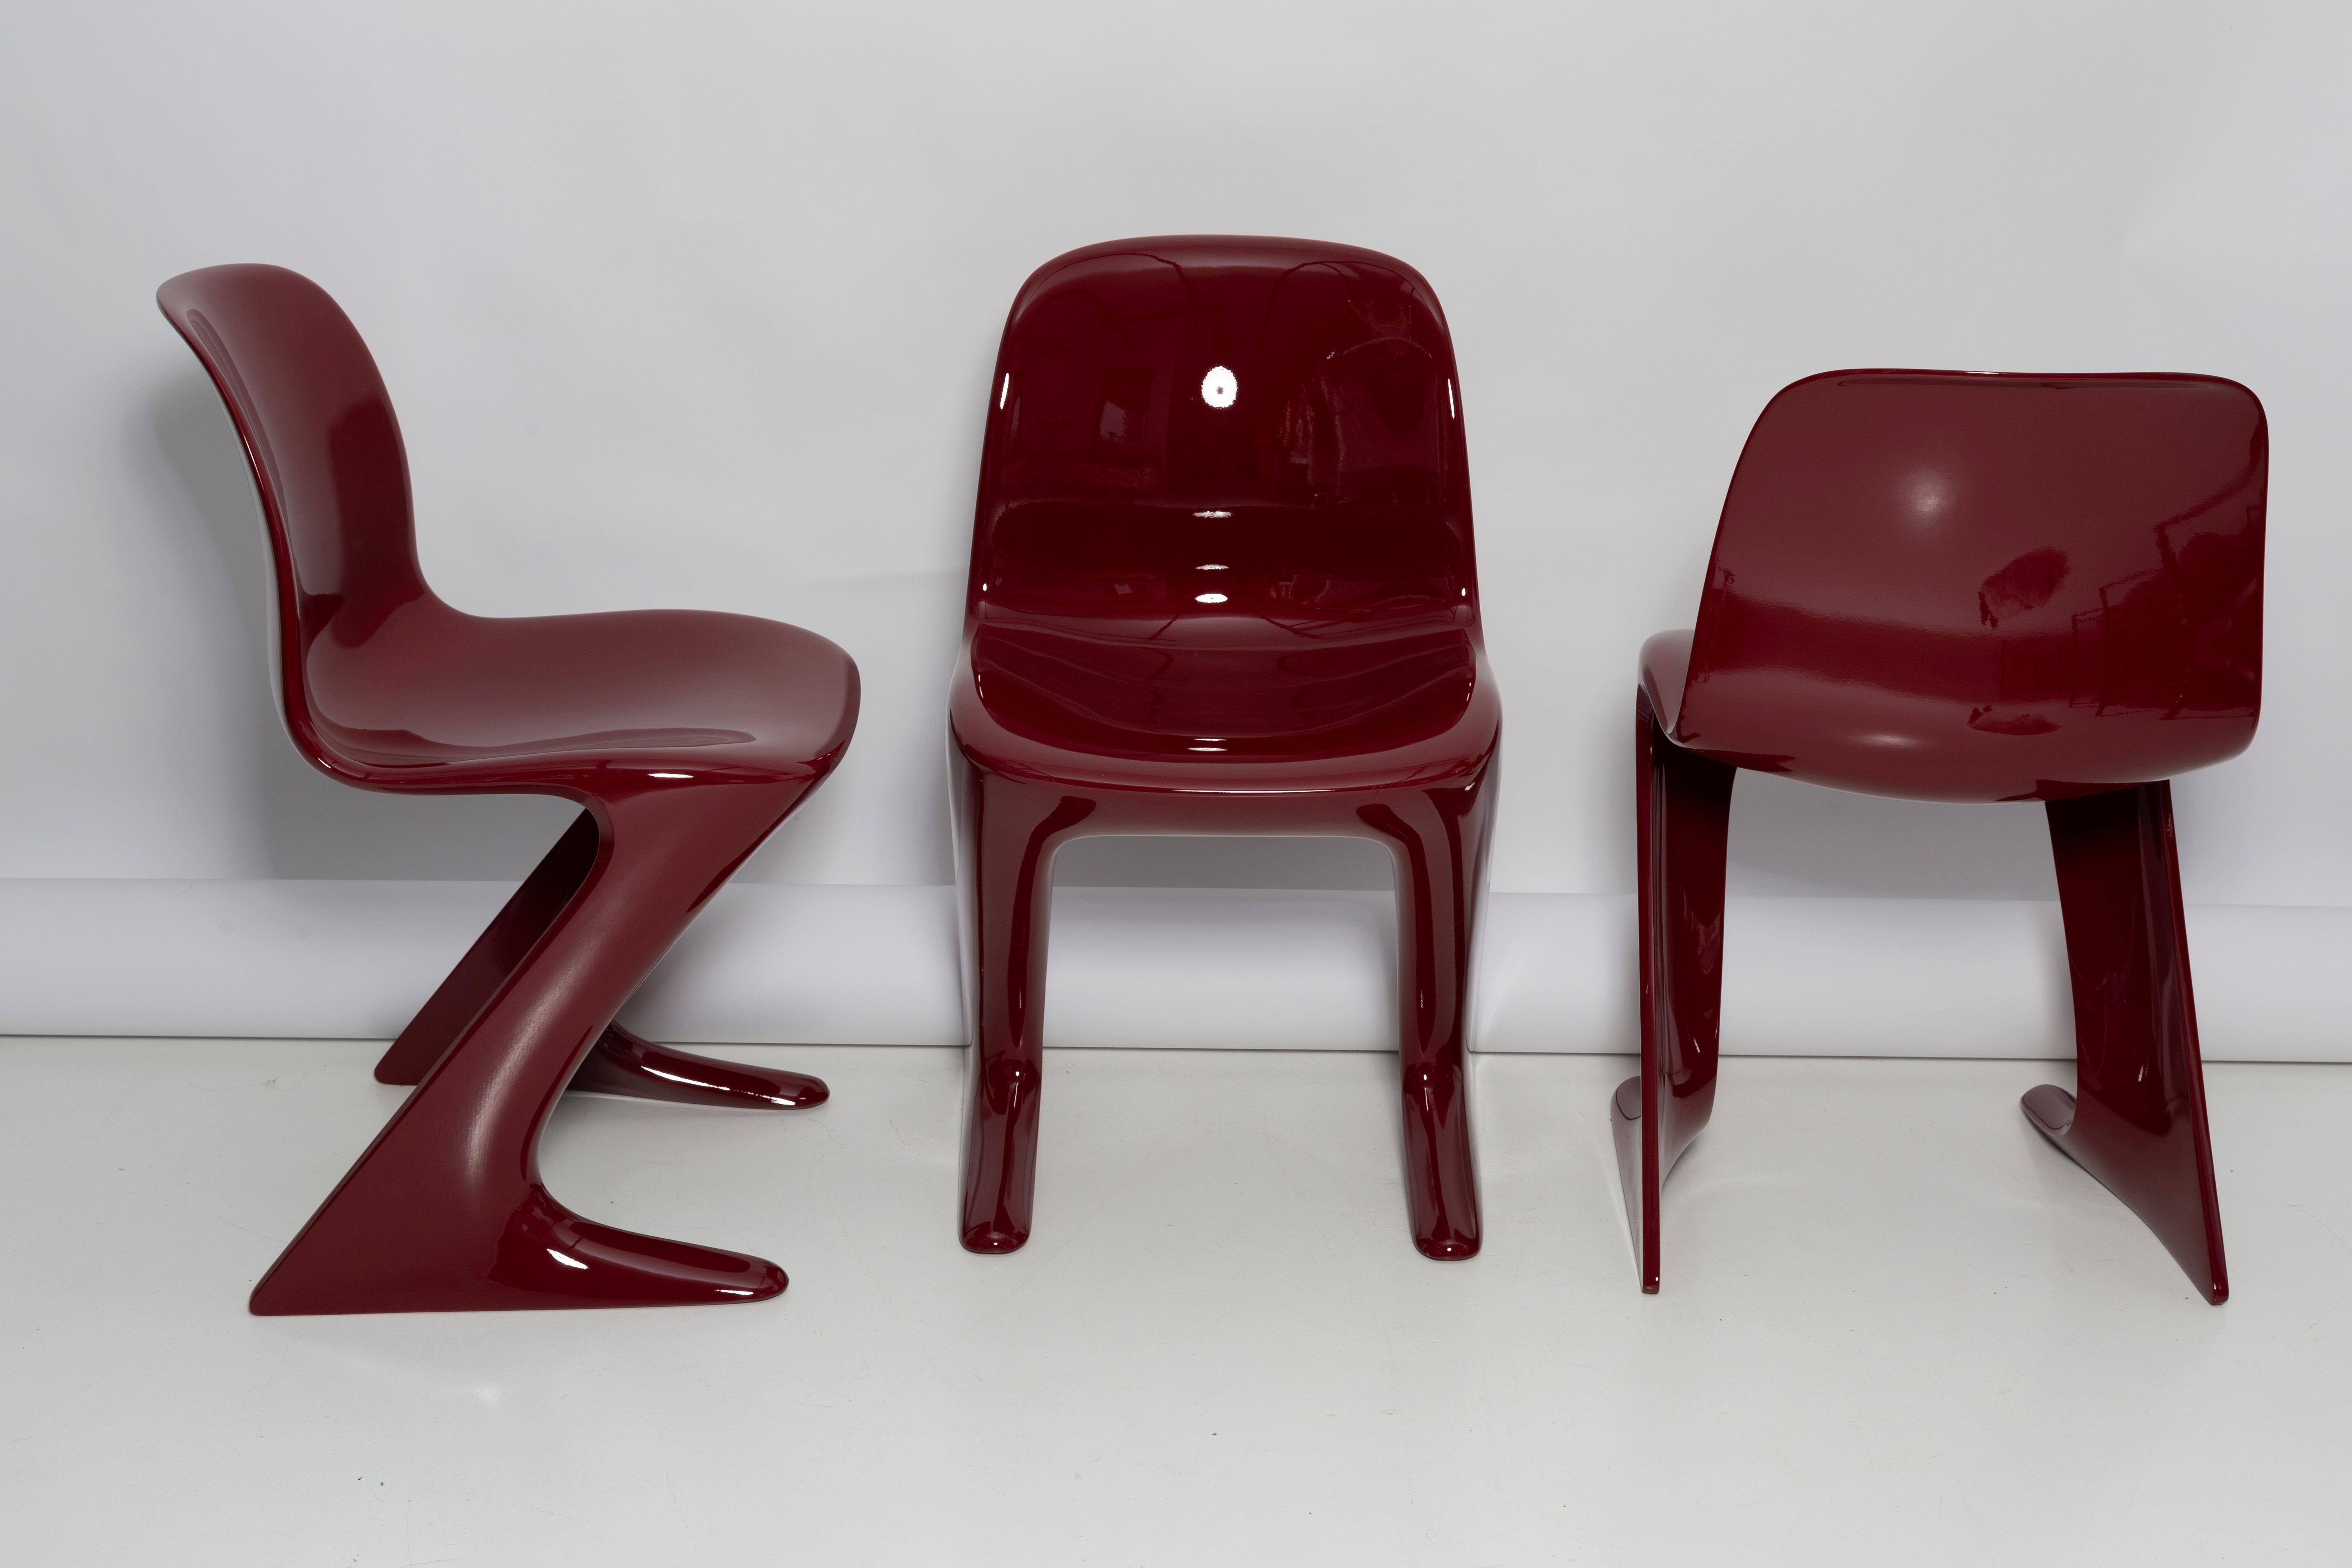 20th Century Set of Three Red Wine Kangaroo Chairs Designed by Ernst Moeckl, Germany, 1968 For Sale